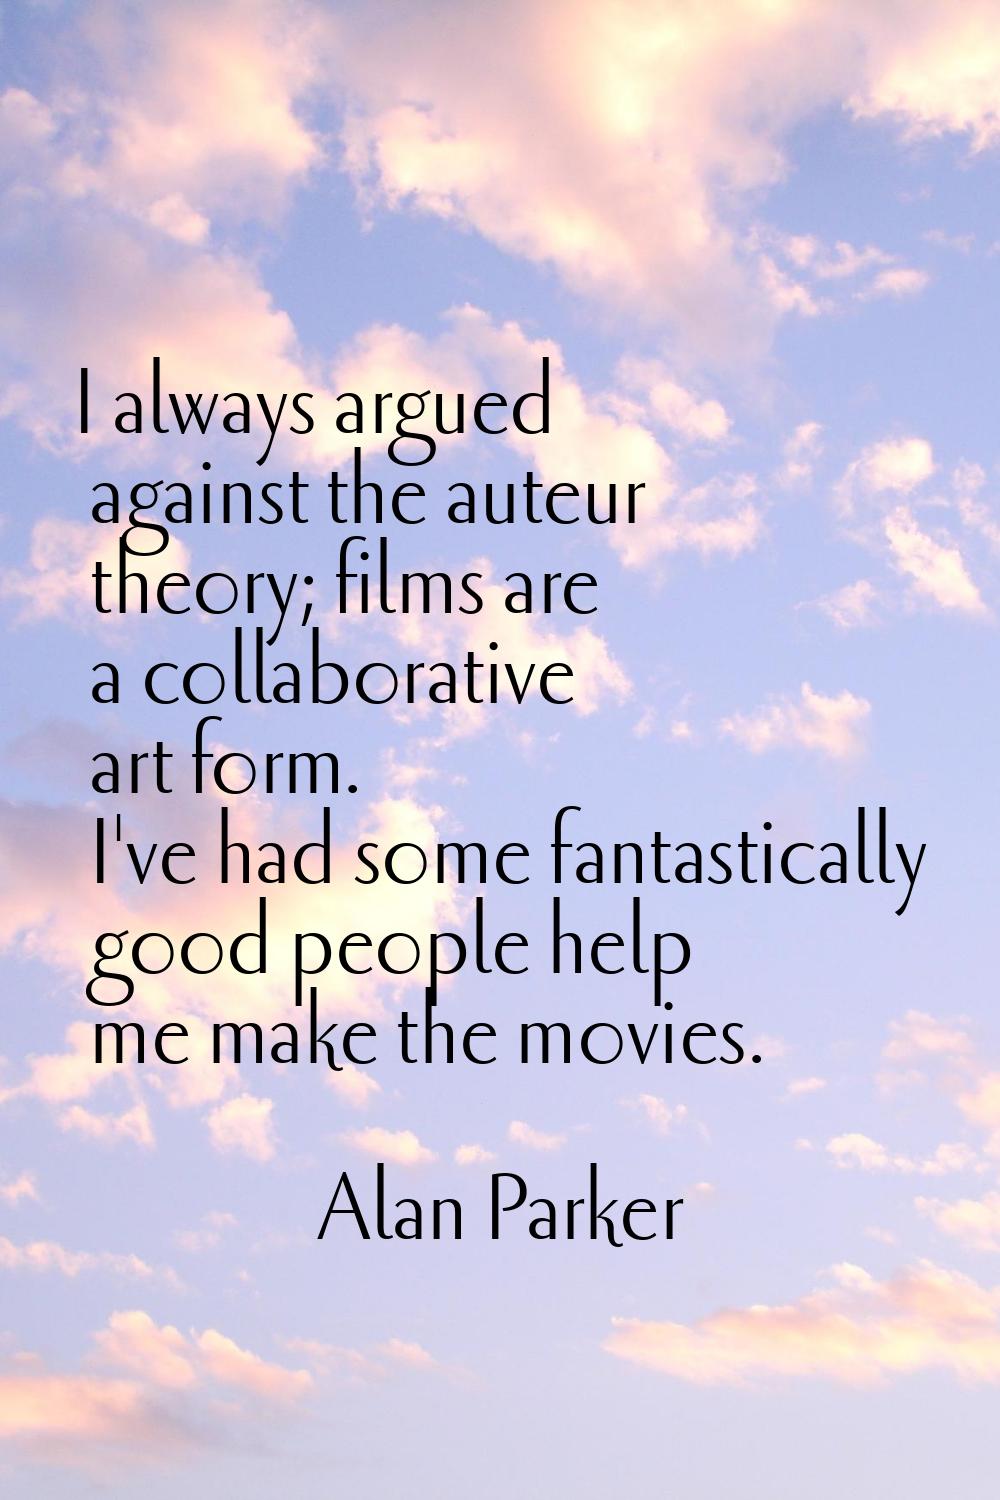 I always argued against the auteur theory; films are a collaborative art form. I've had some fantas